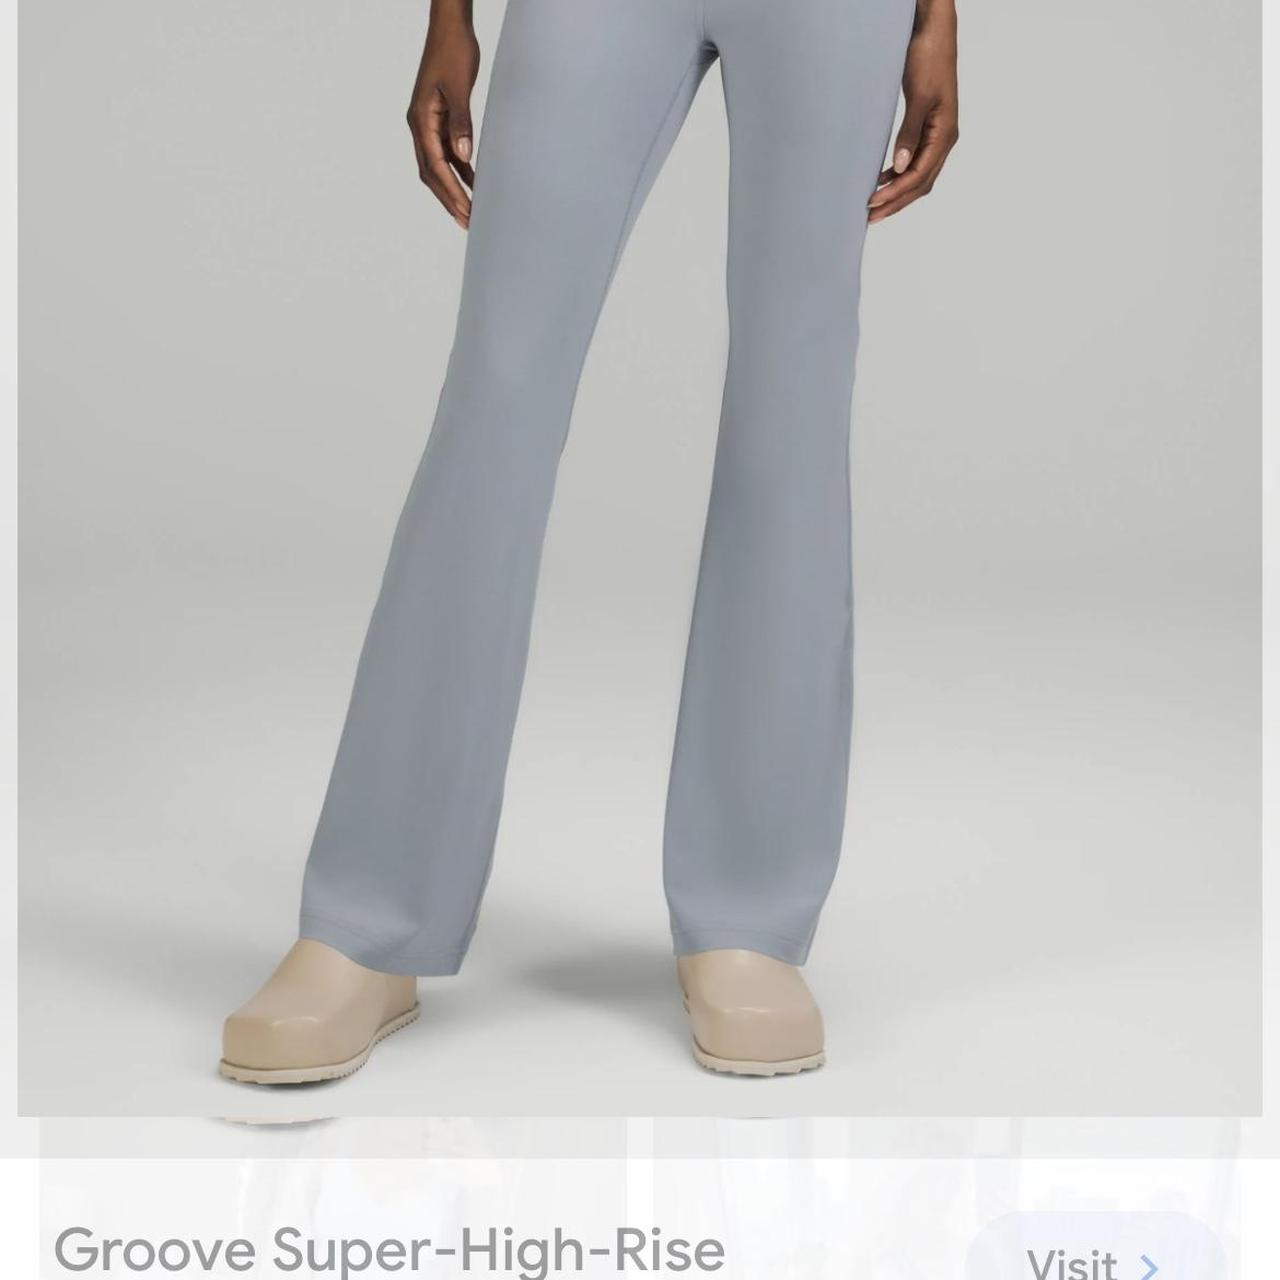 Groove super-high-rise flared pant nulu from - Depop